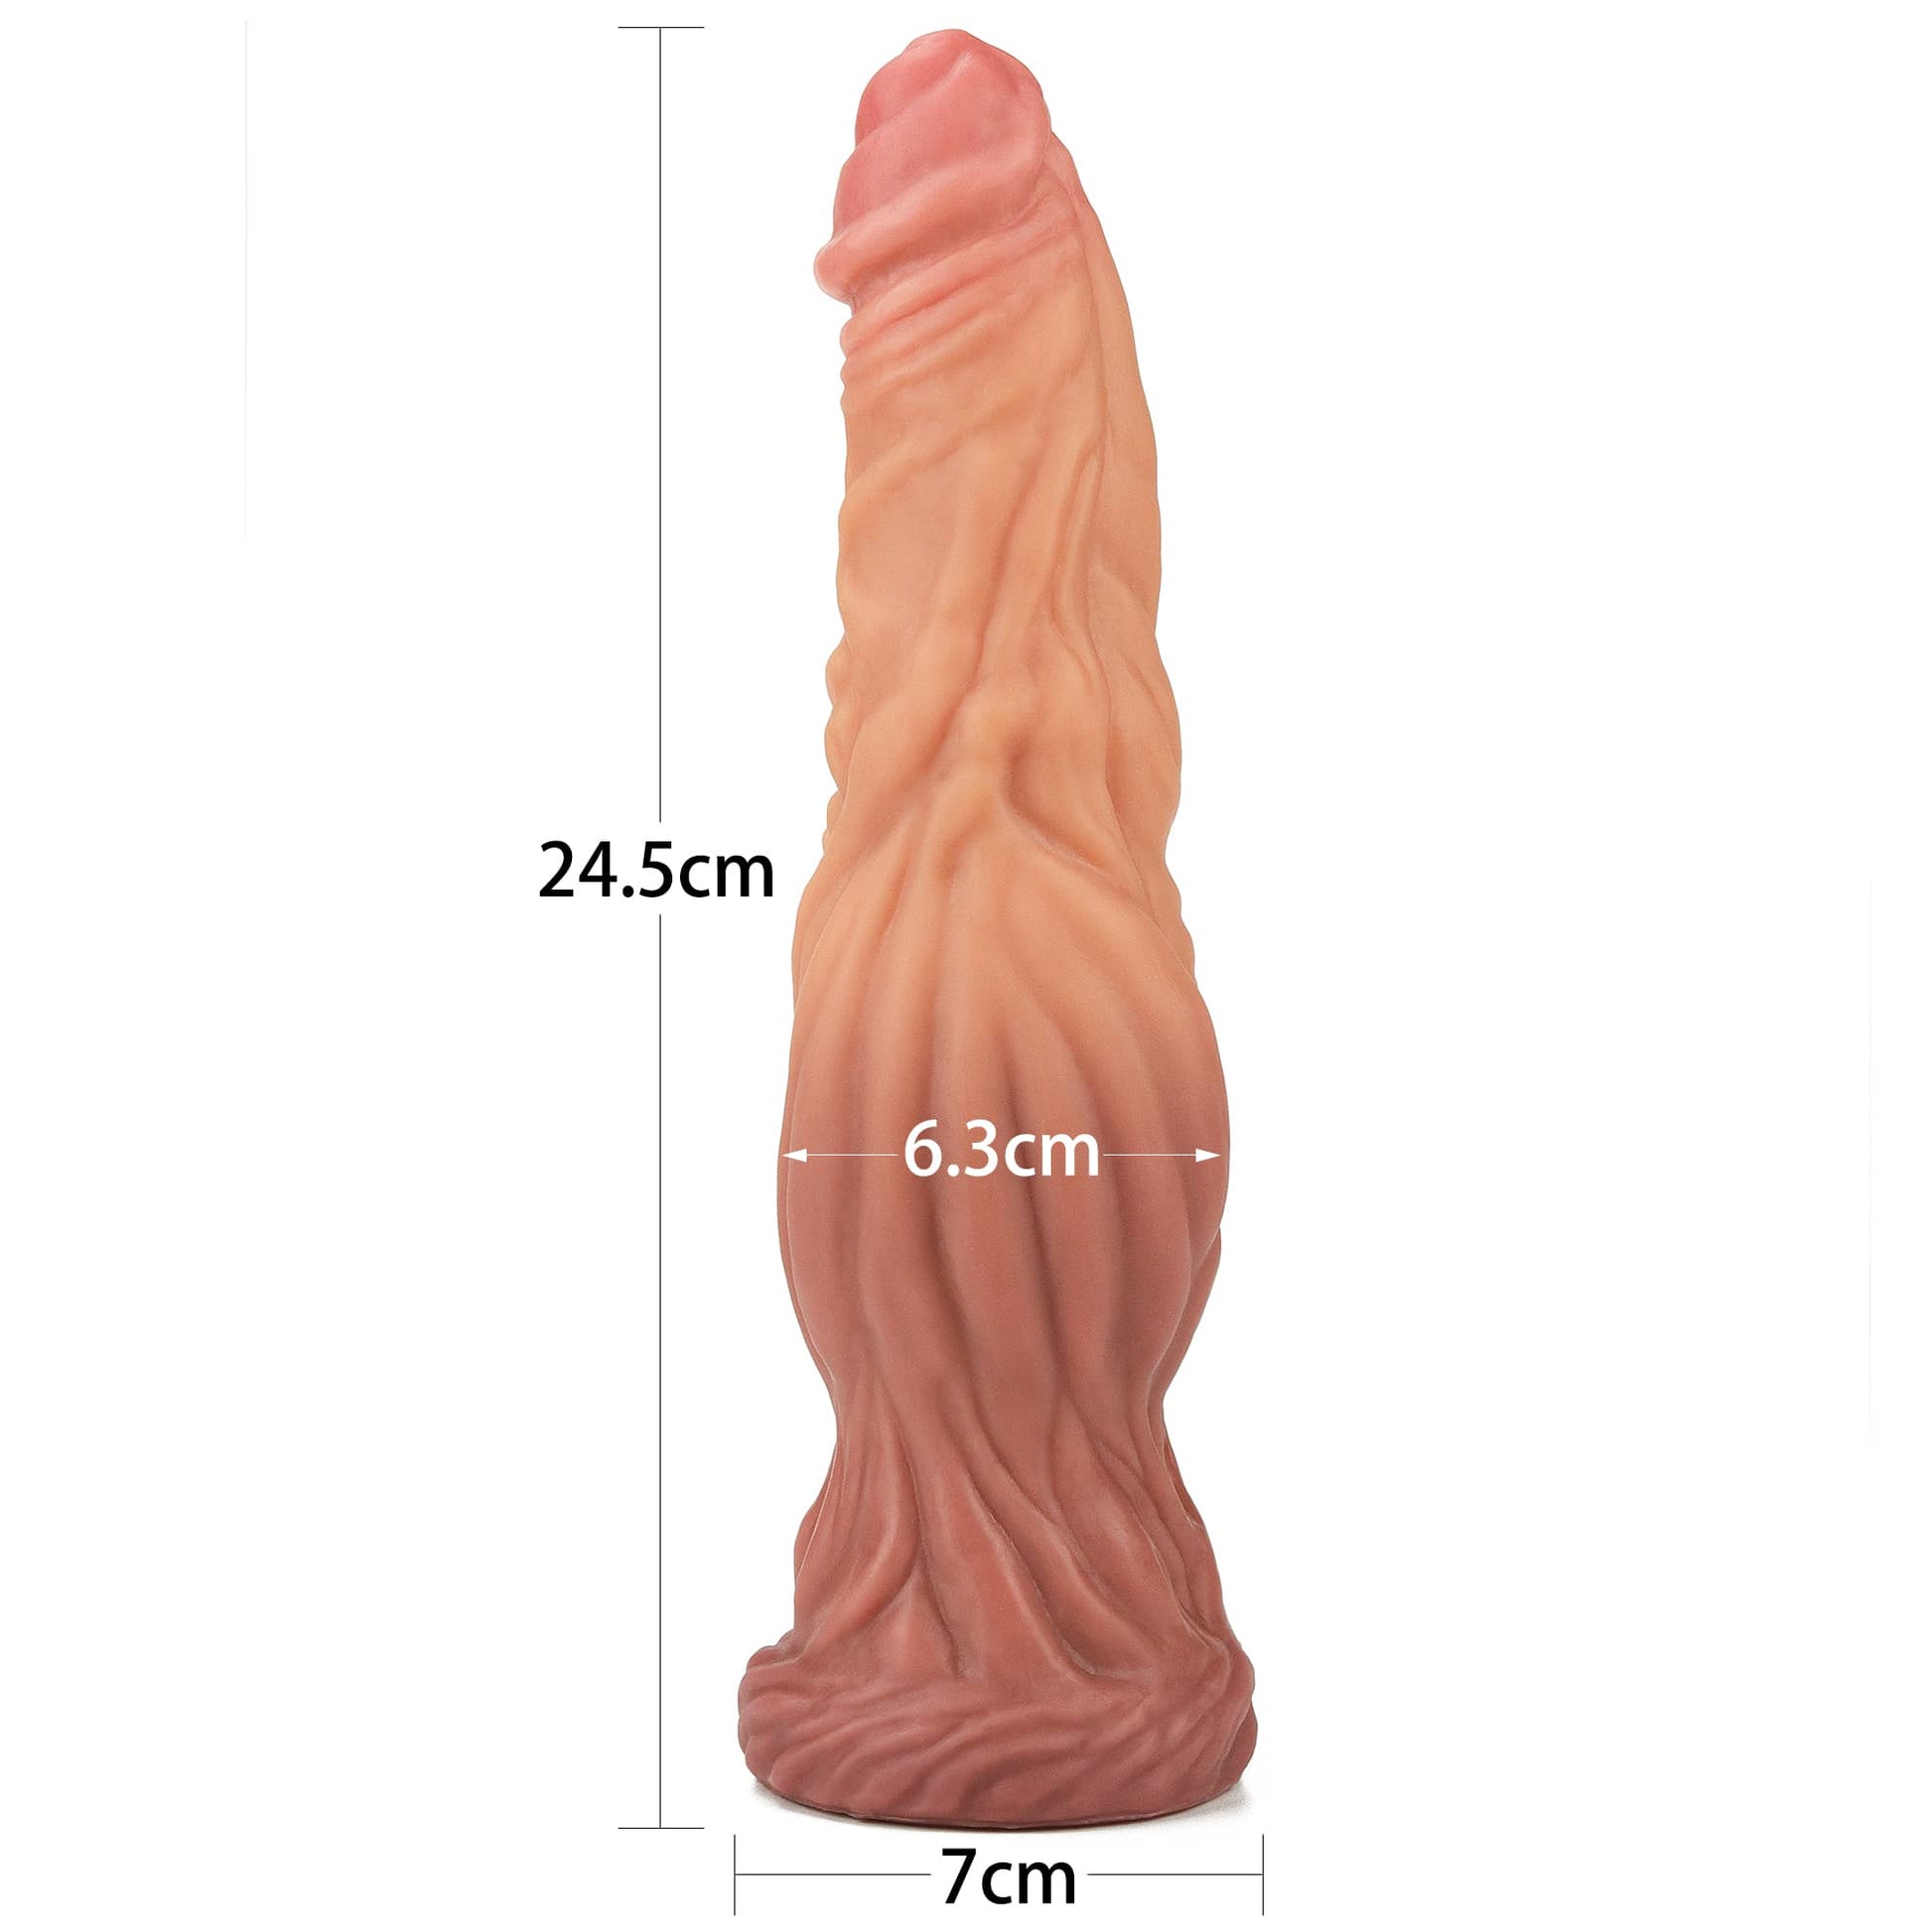 The size of the 9.5 inches silicone realistic wolf dildo